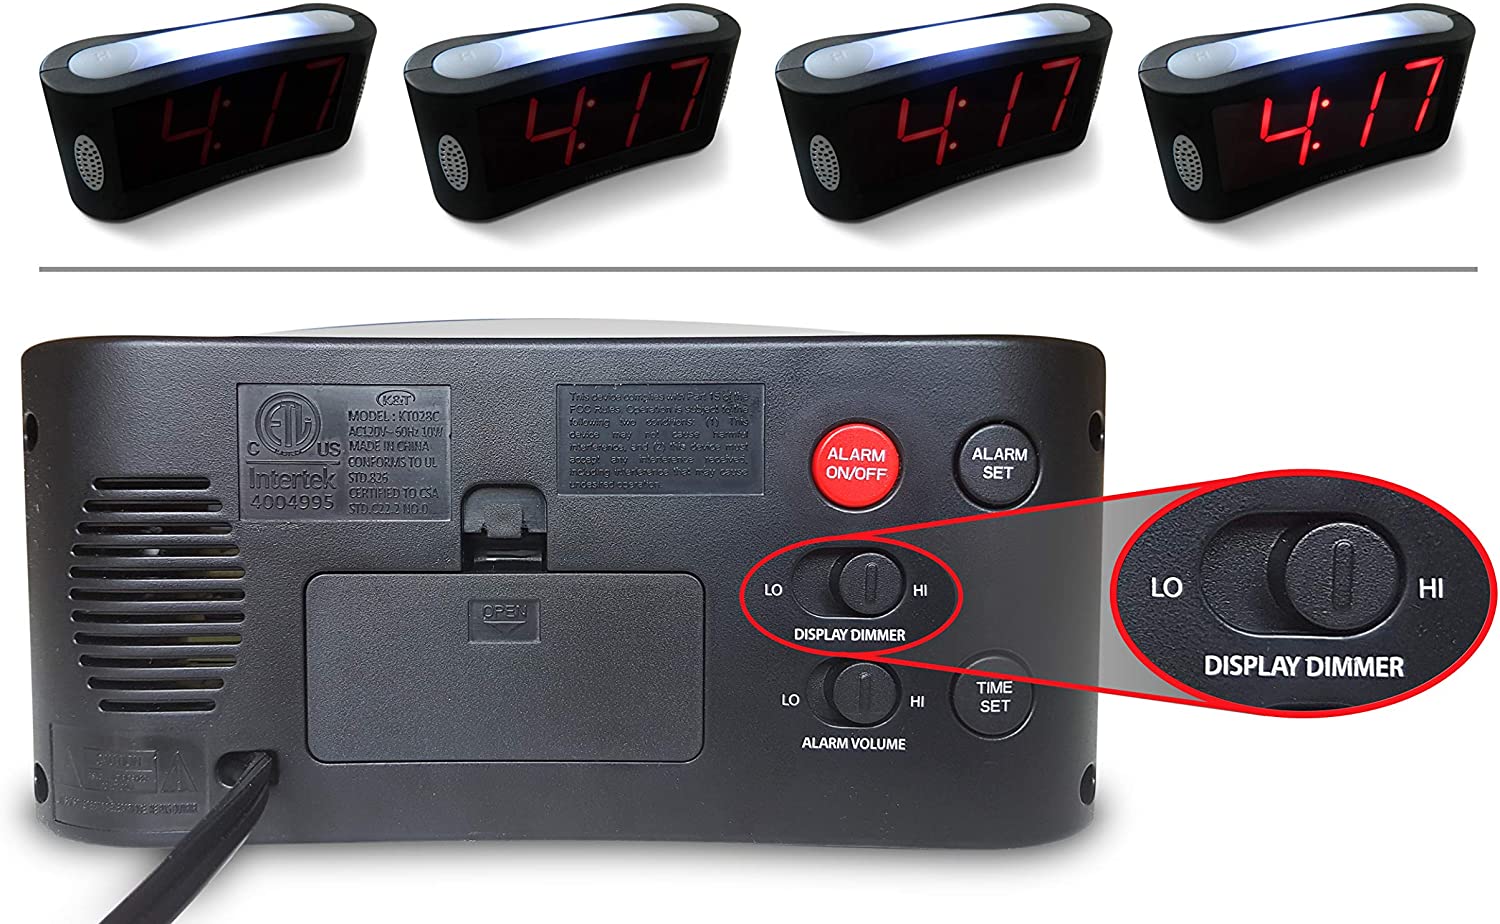 Travelwey Digital Alarm Clock - Outlet Powered, No Frills Simple ...